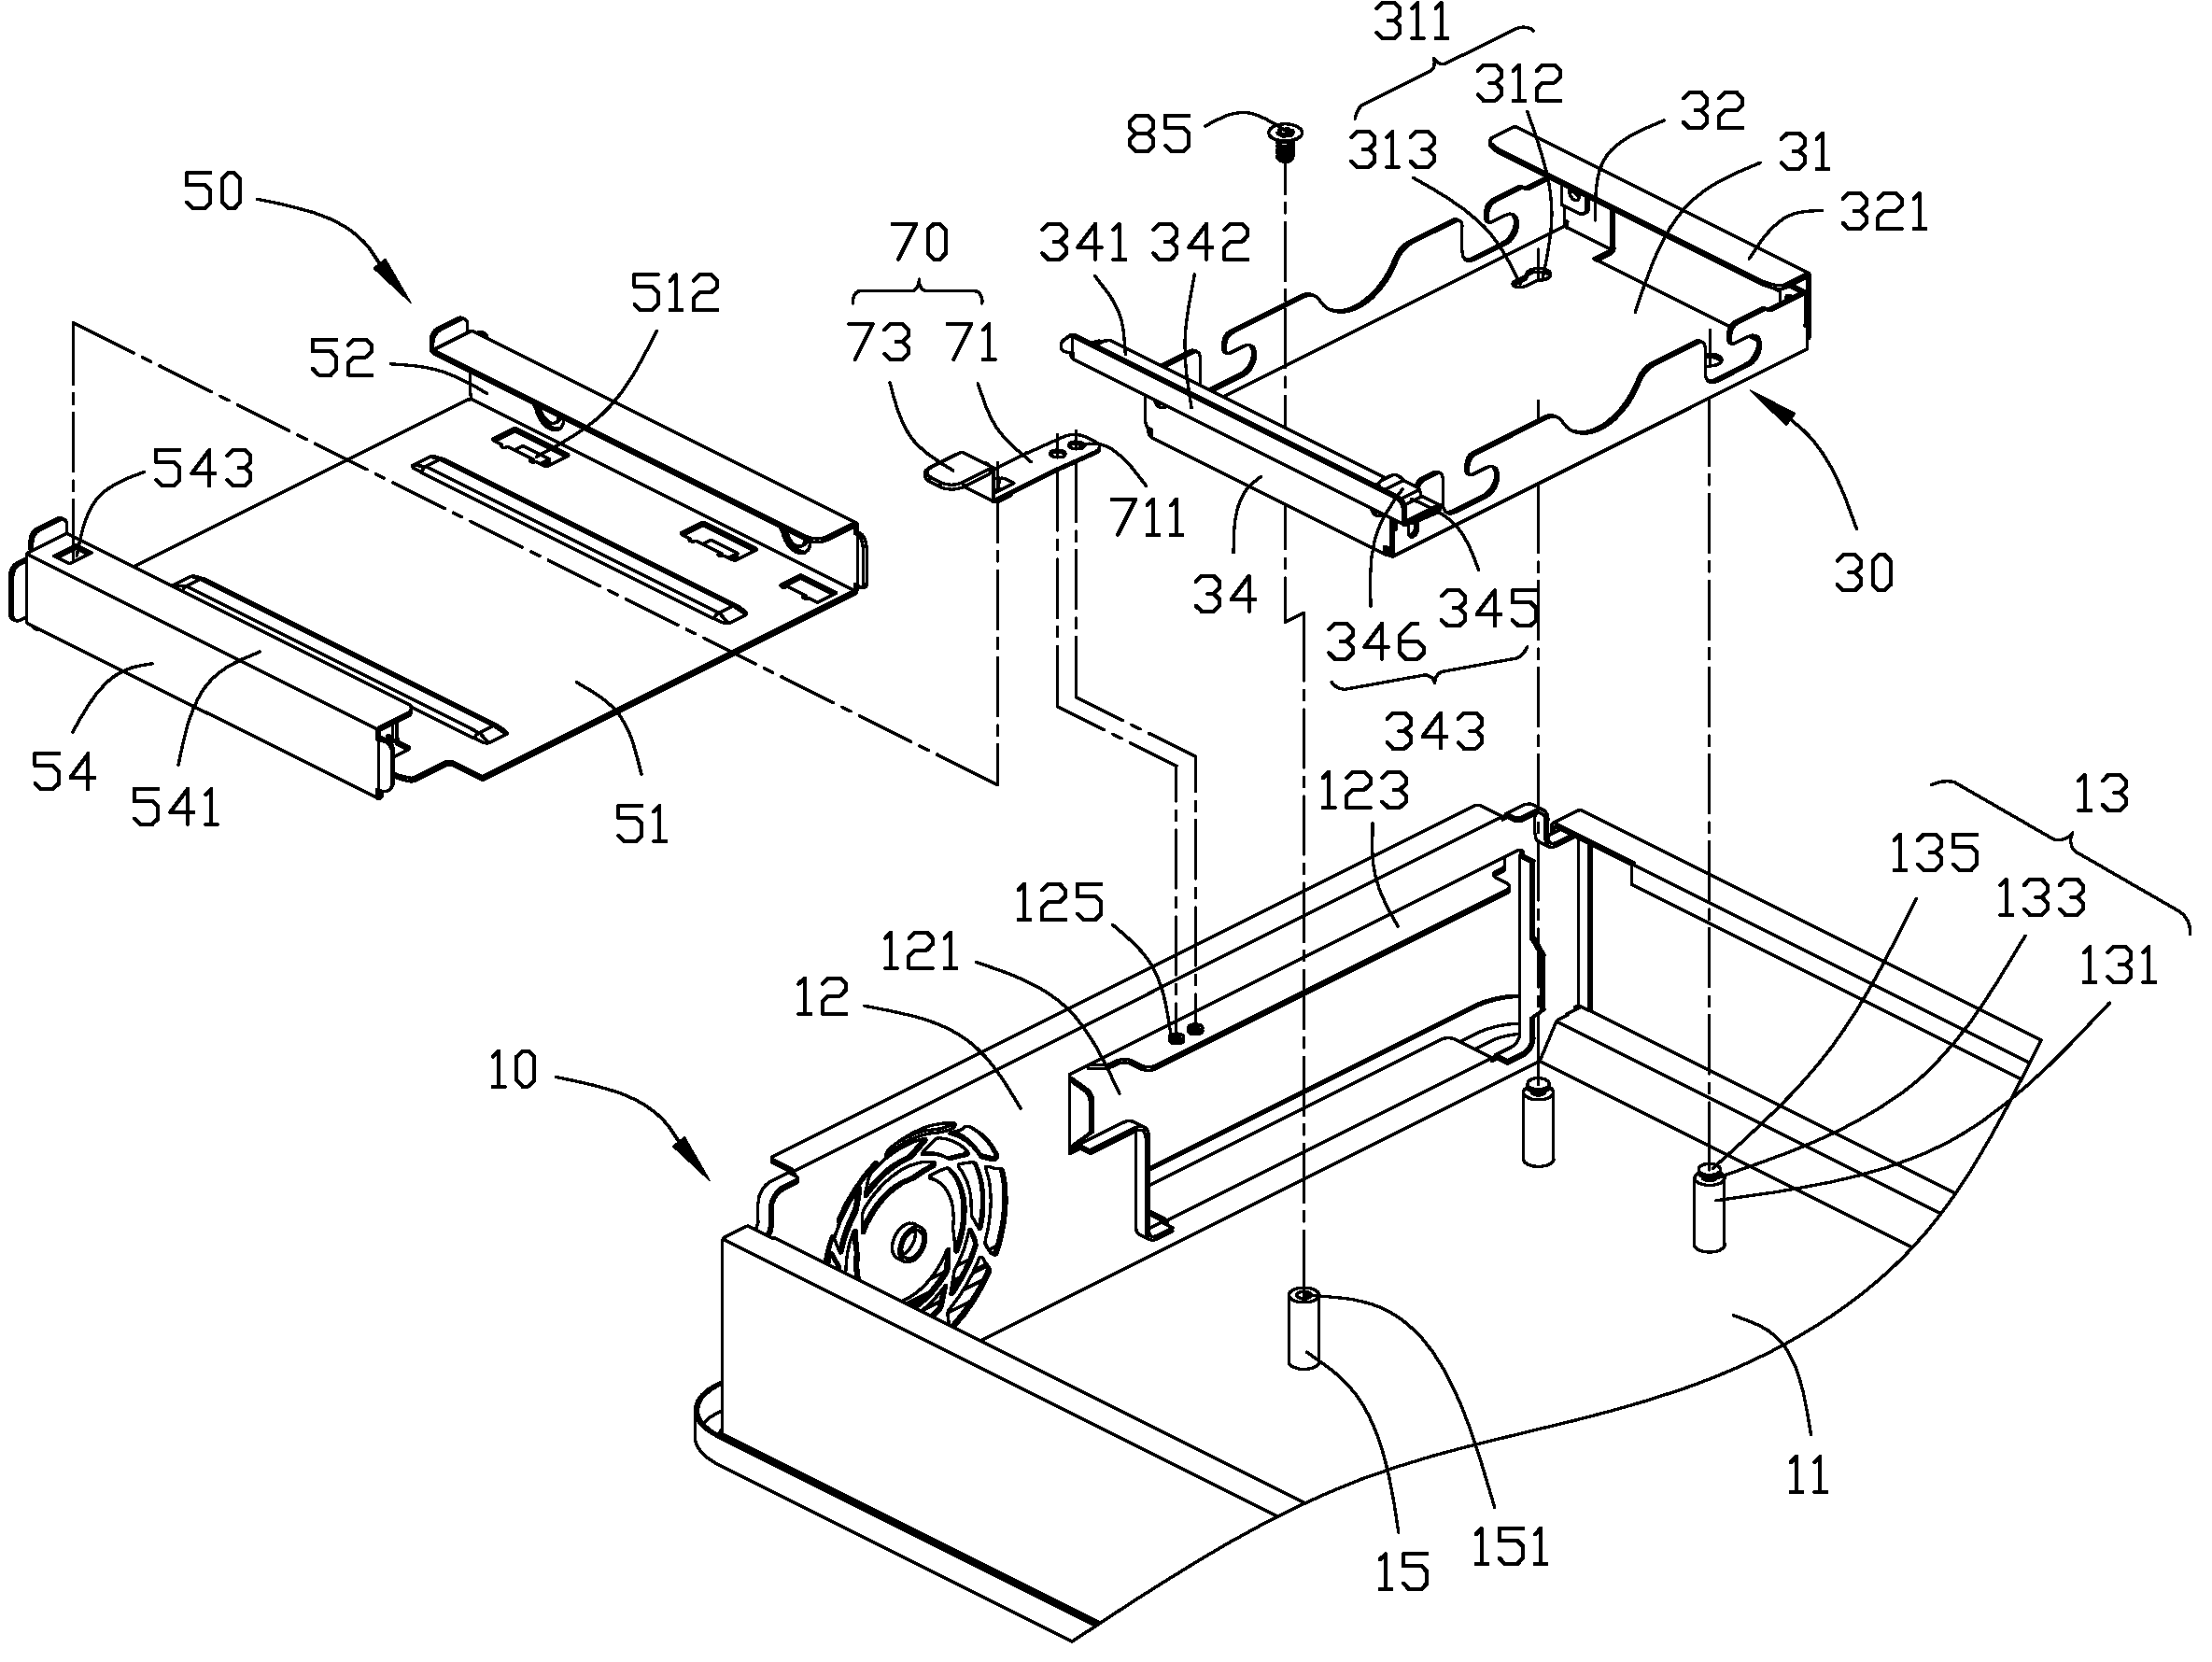 Computer enclosure with drive bracket